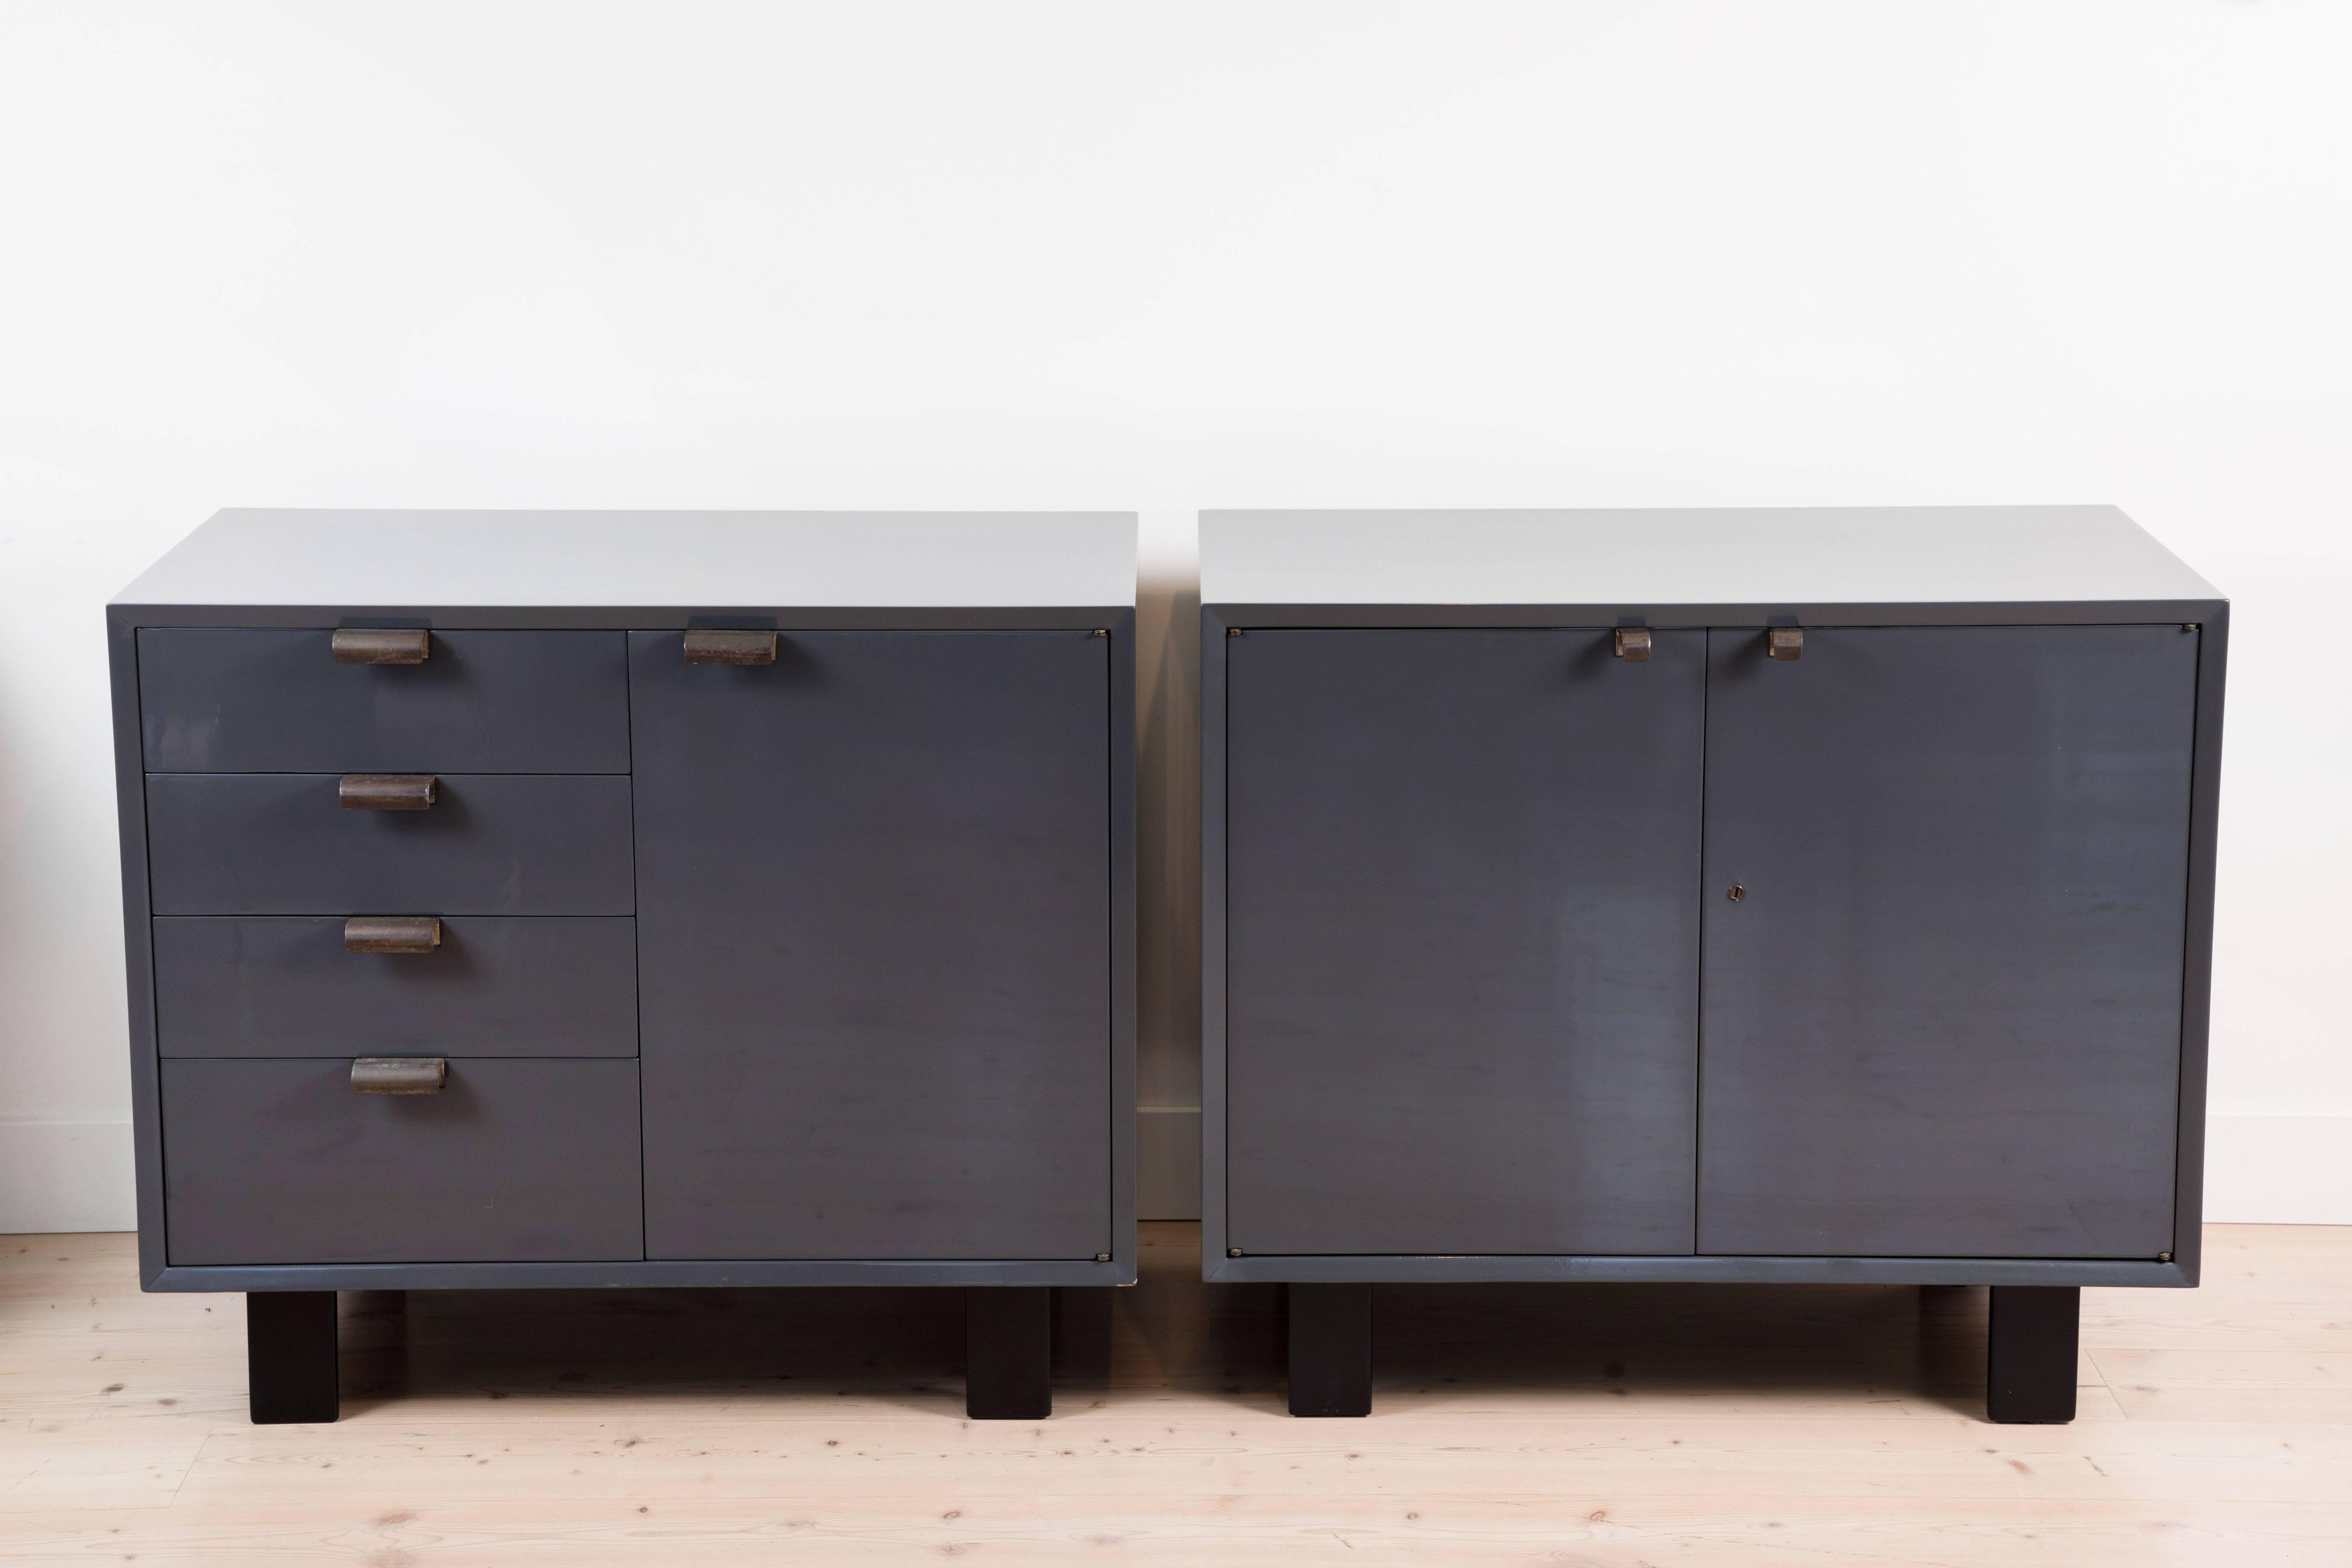 Pair of lacquered chests by George Nelson for Herman Miller.